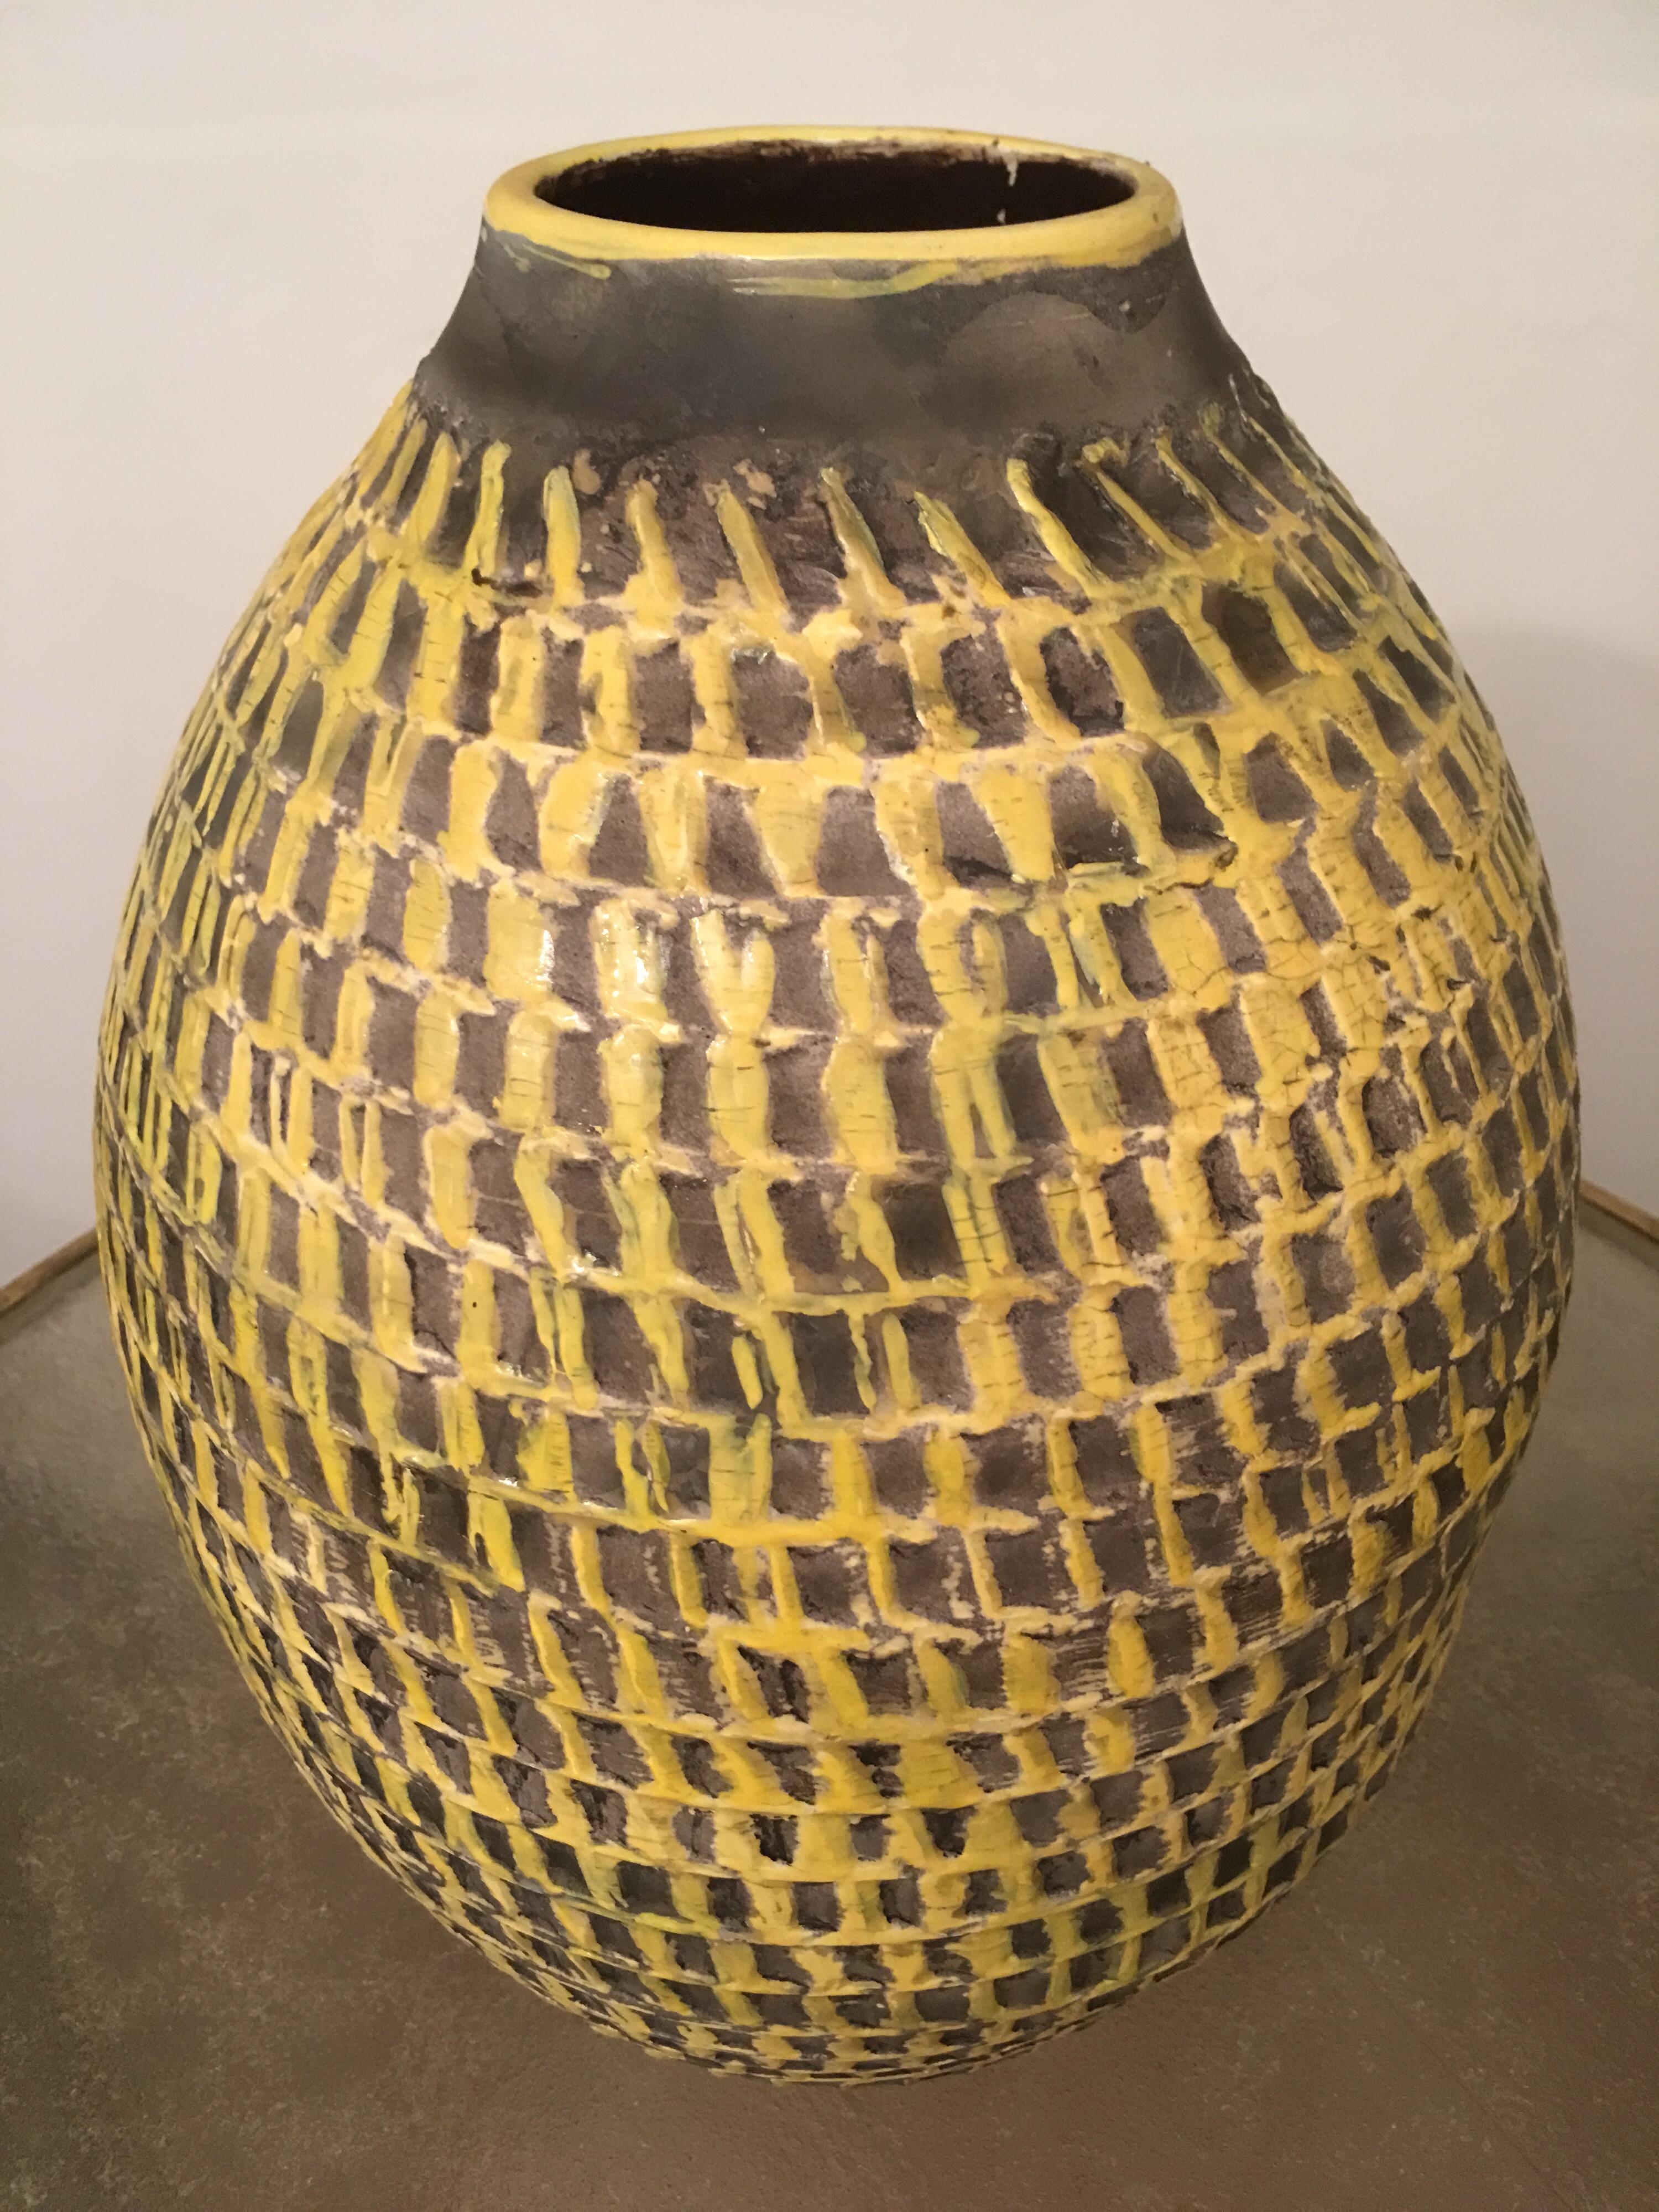 Rare Large ceramic vase made by Jean Besnard in 1930s.
Beautiful yellow incised decor on grey background.
Signed JB FRANCE underside.